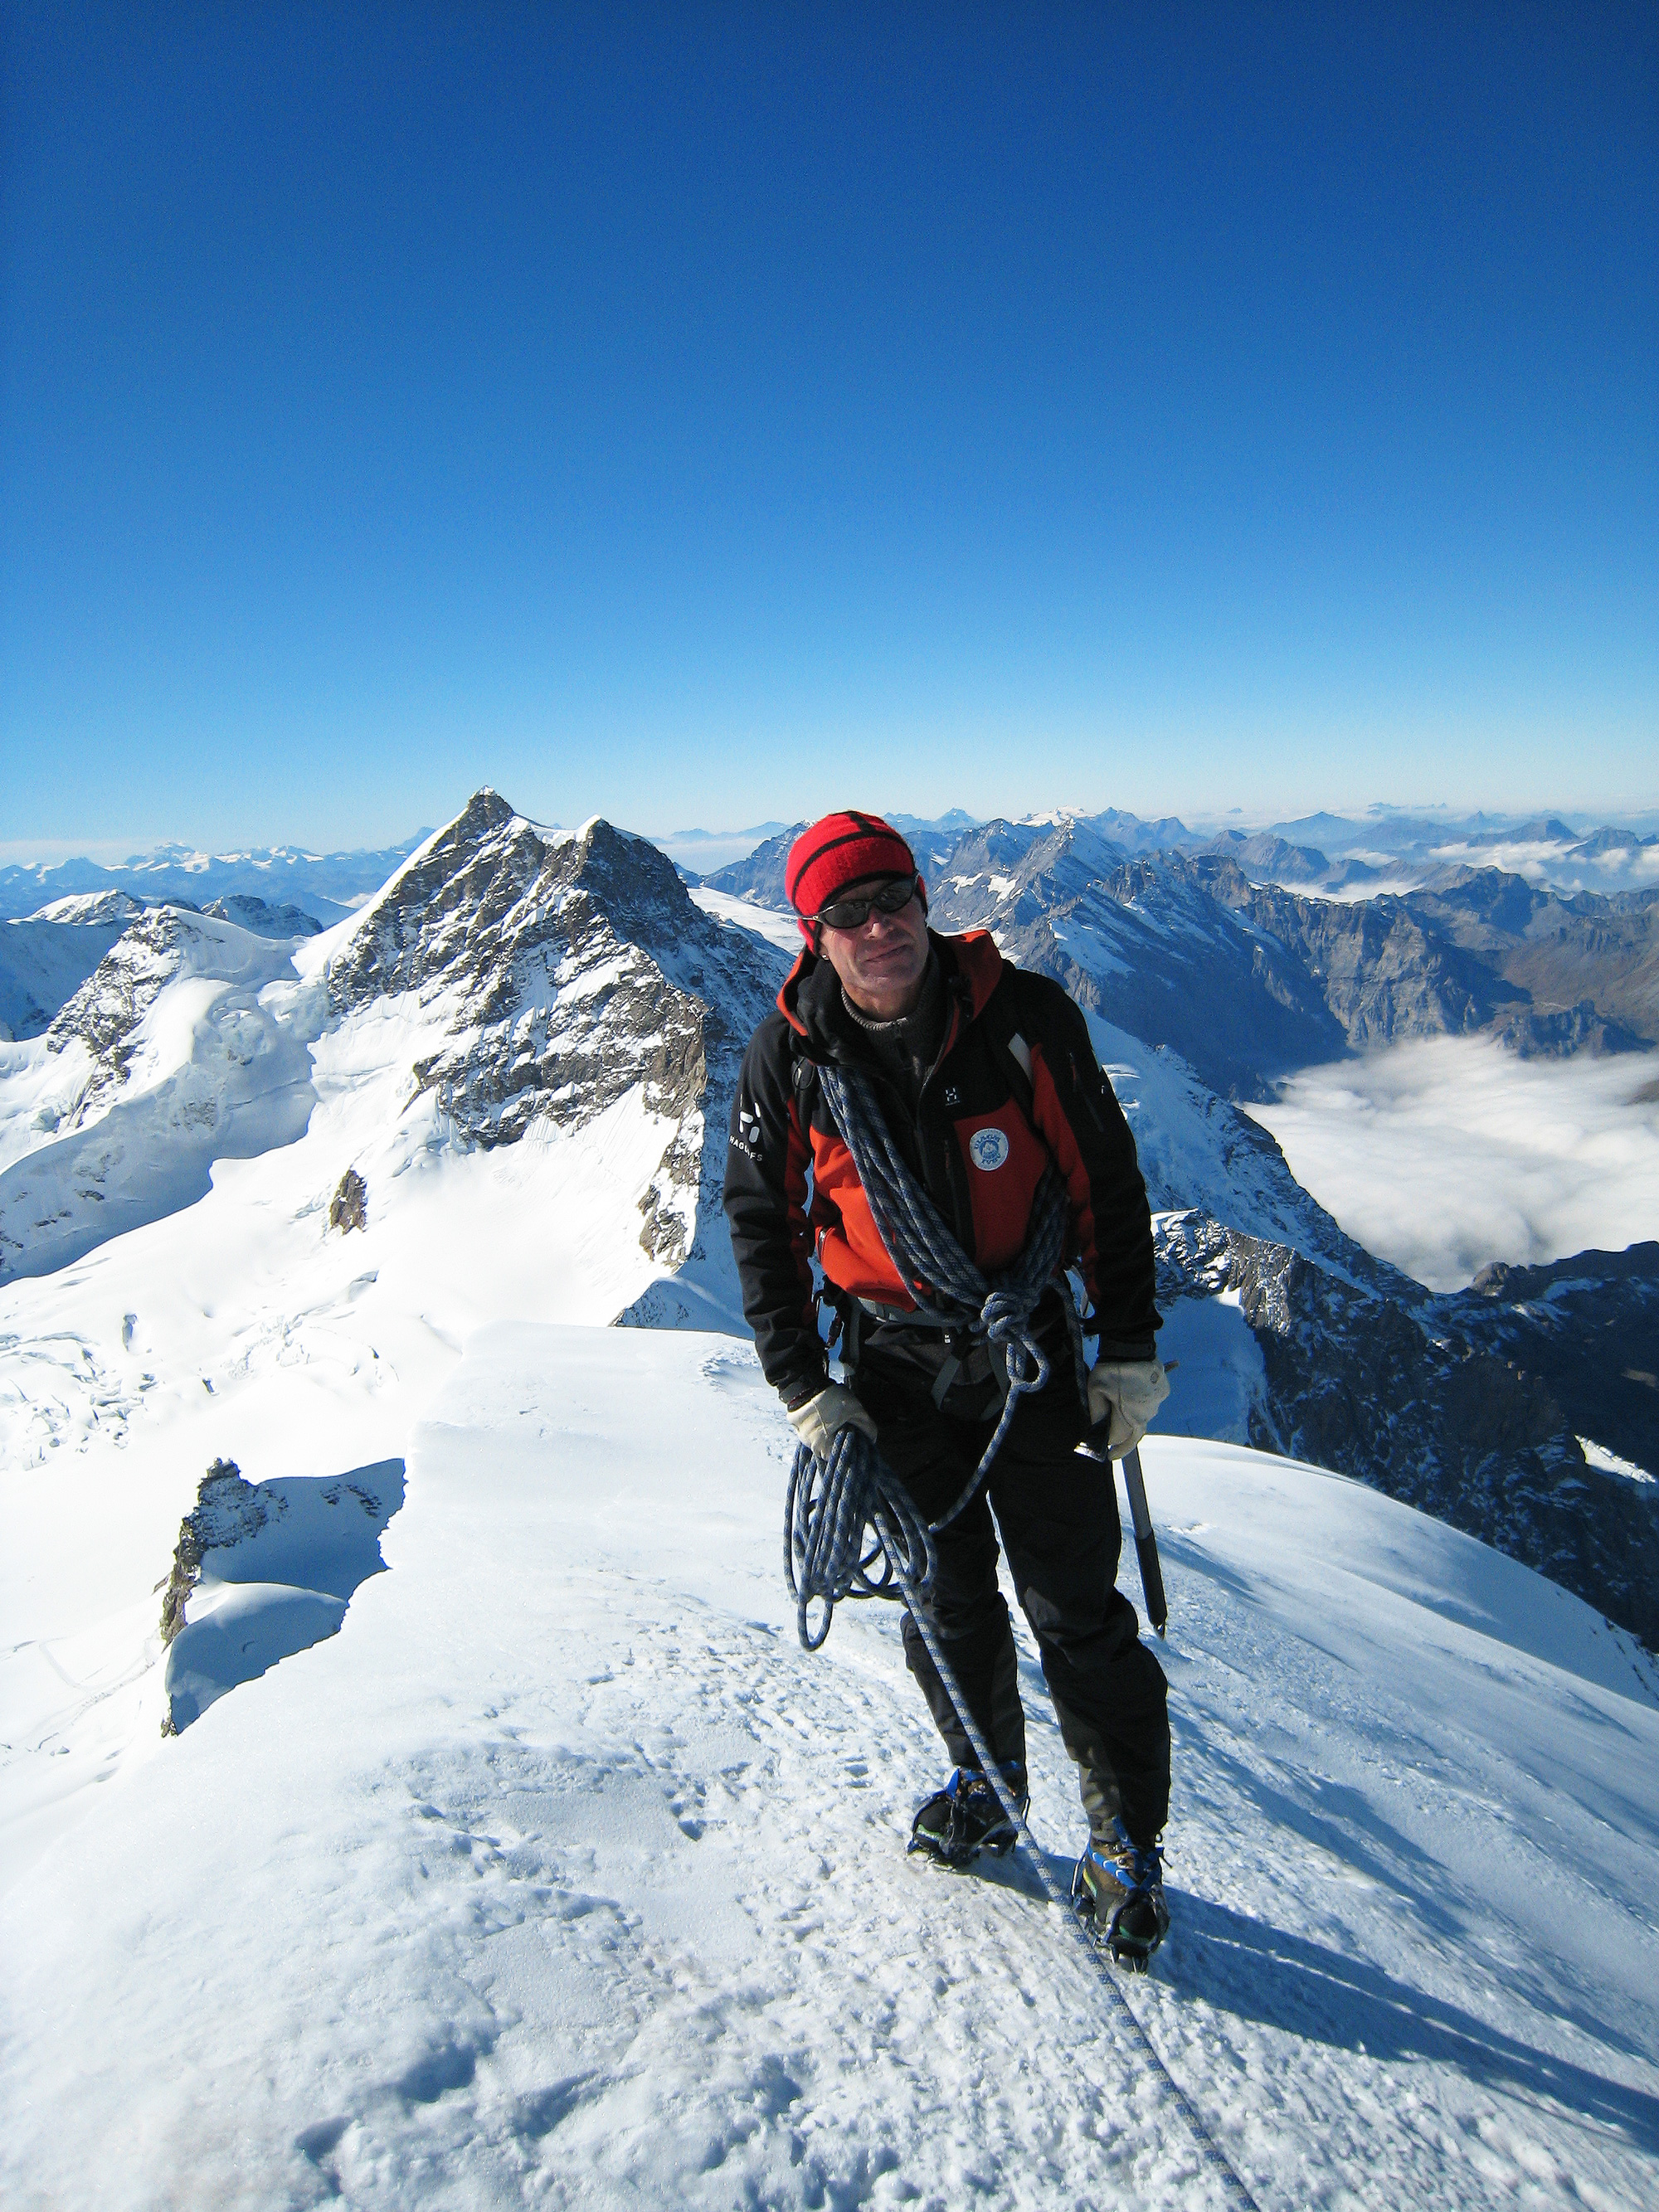 Debunking the myths of mountaineering